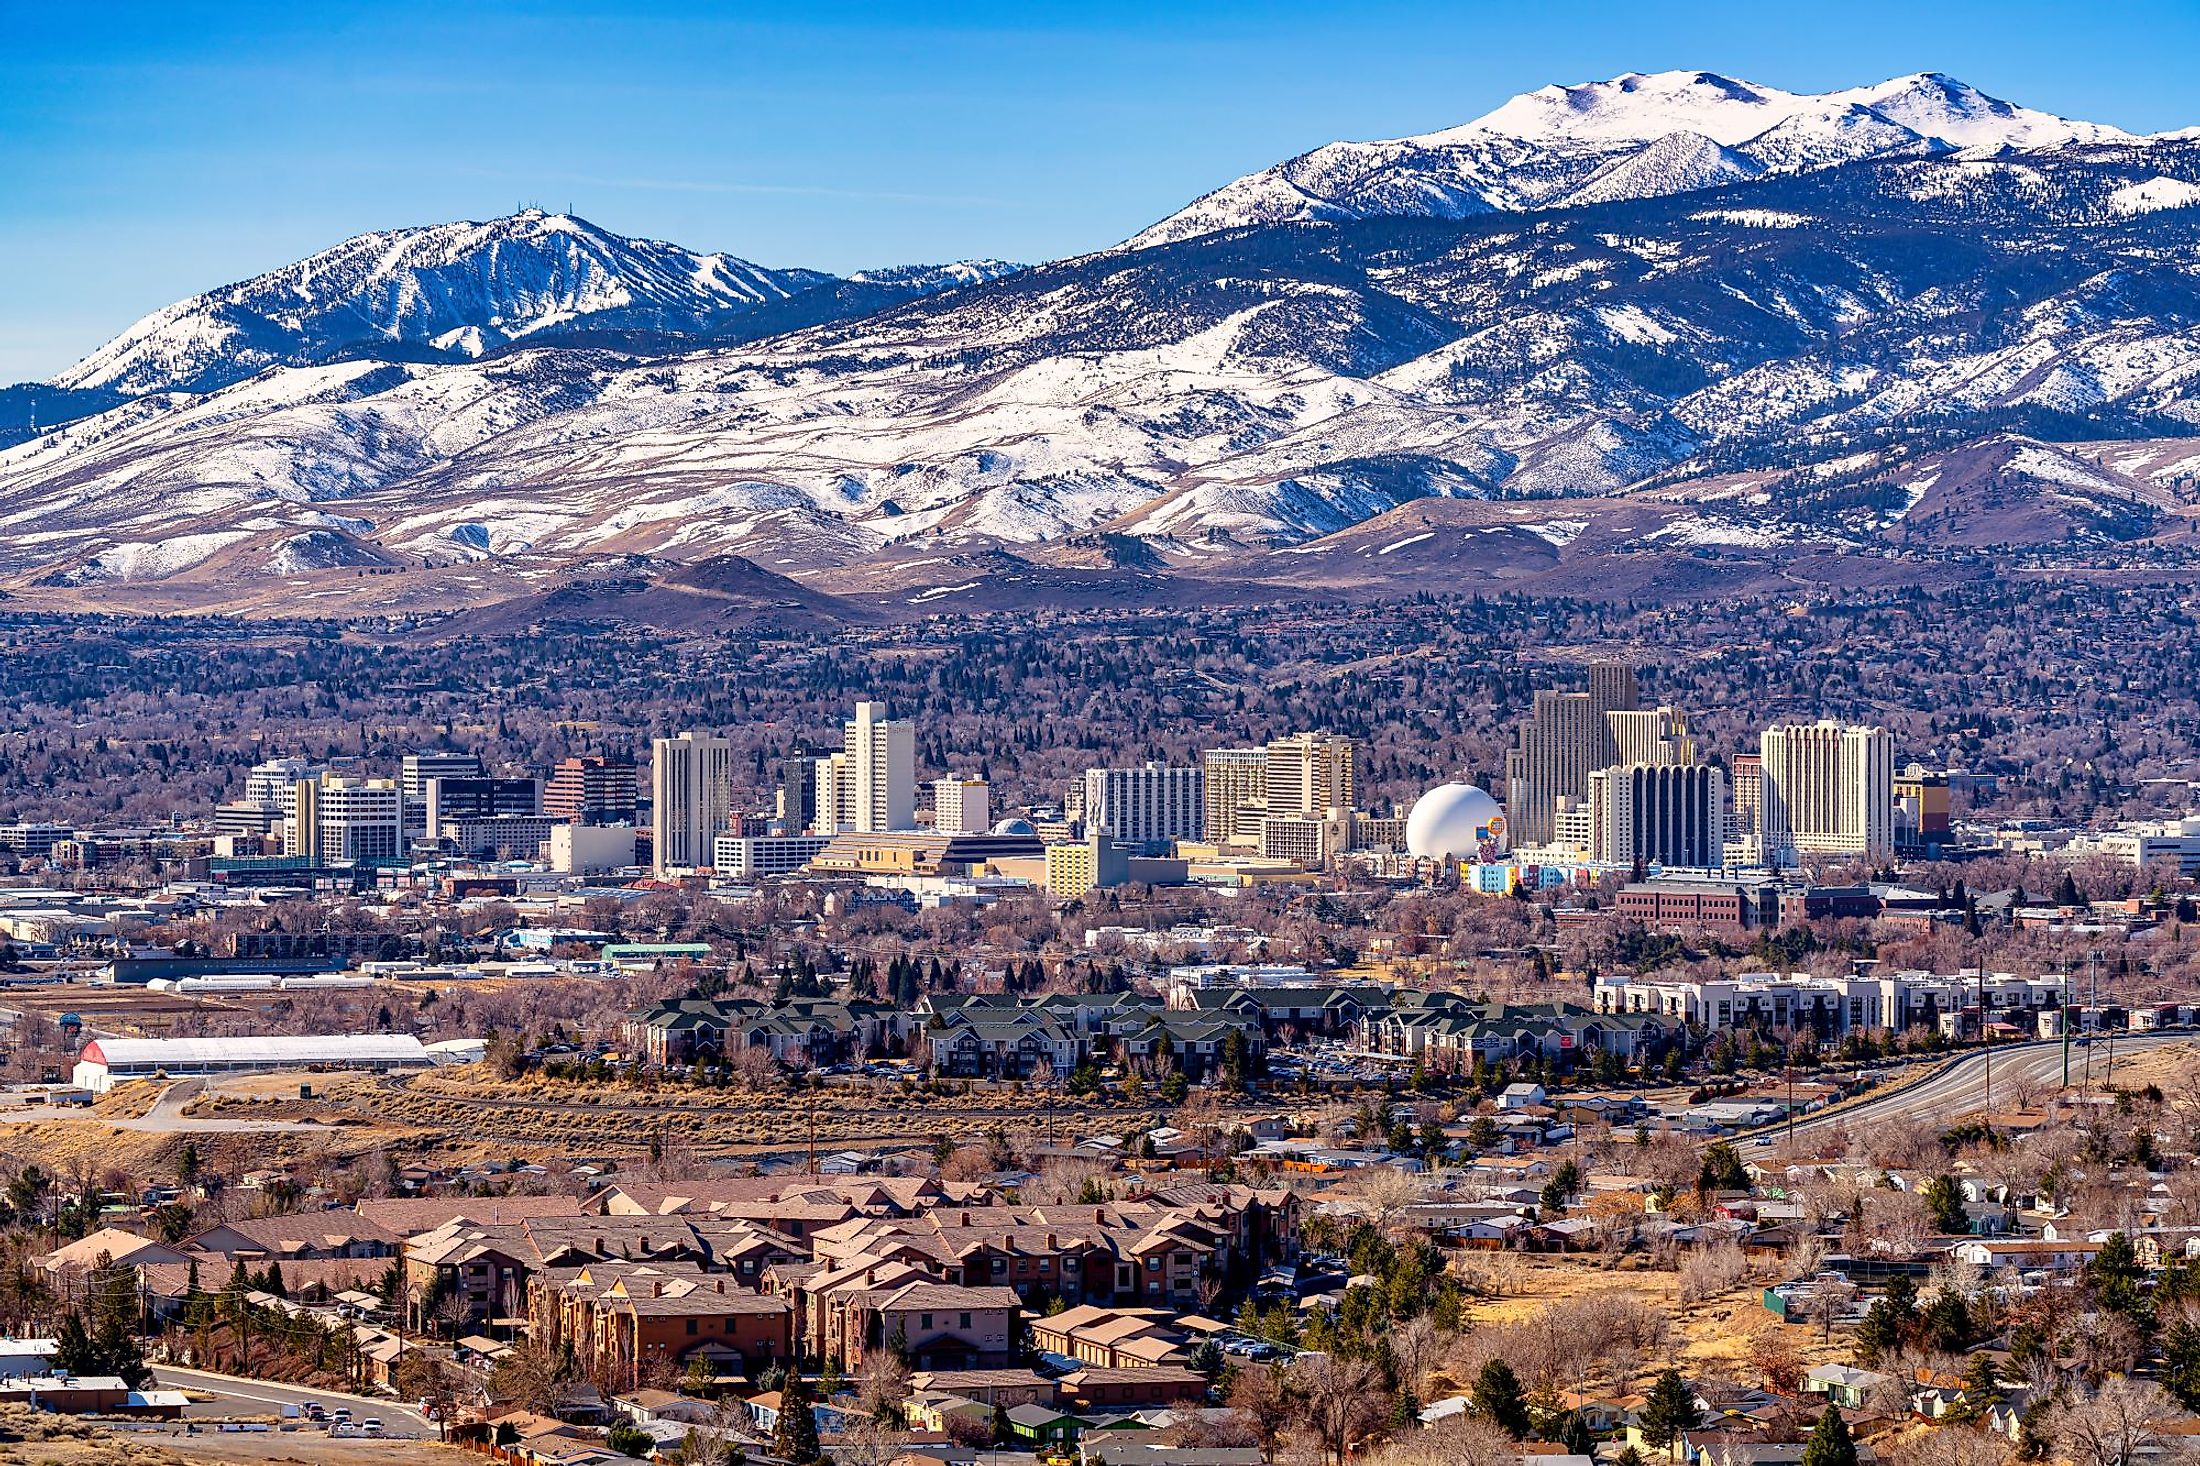 City of Reno, Nevada, cityscape showing the downtown skyline with hotels, casinos and surrounding residential area. Editorial credit: Gchapel / Shutterstock.com